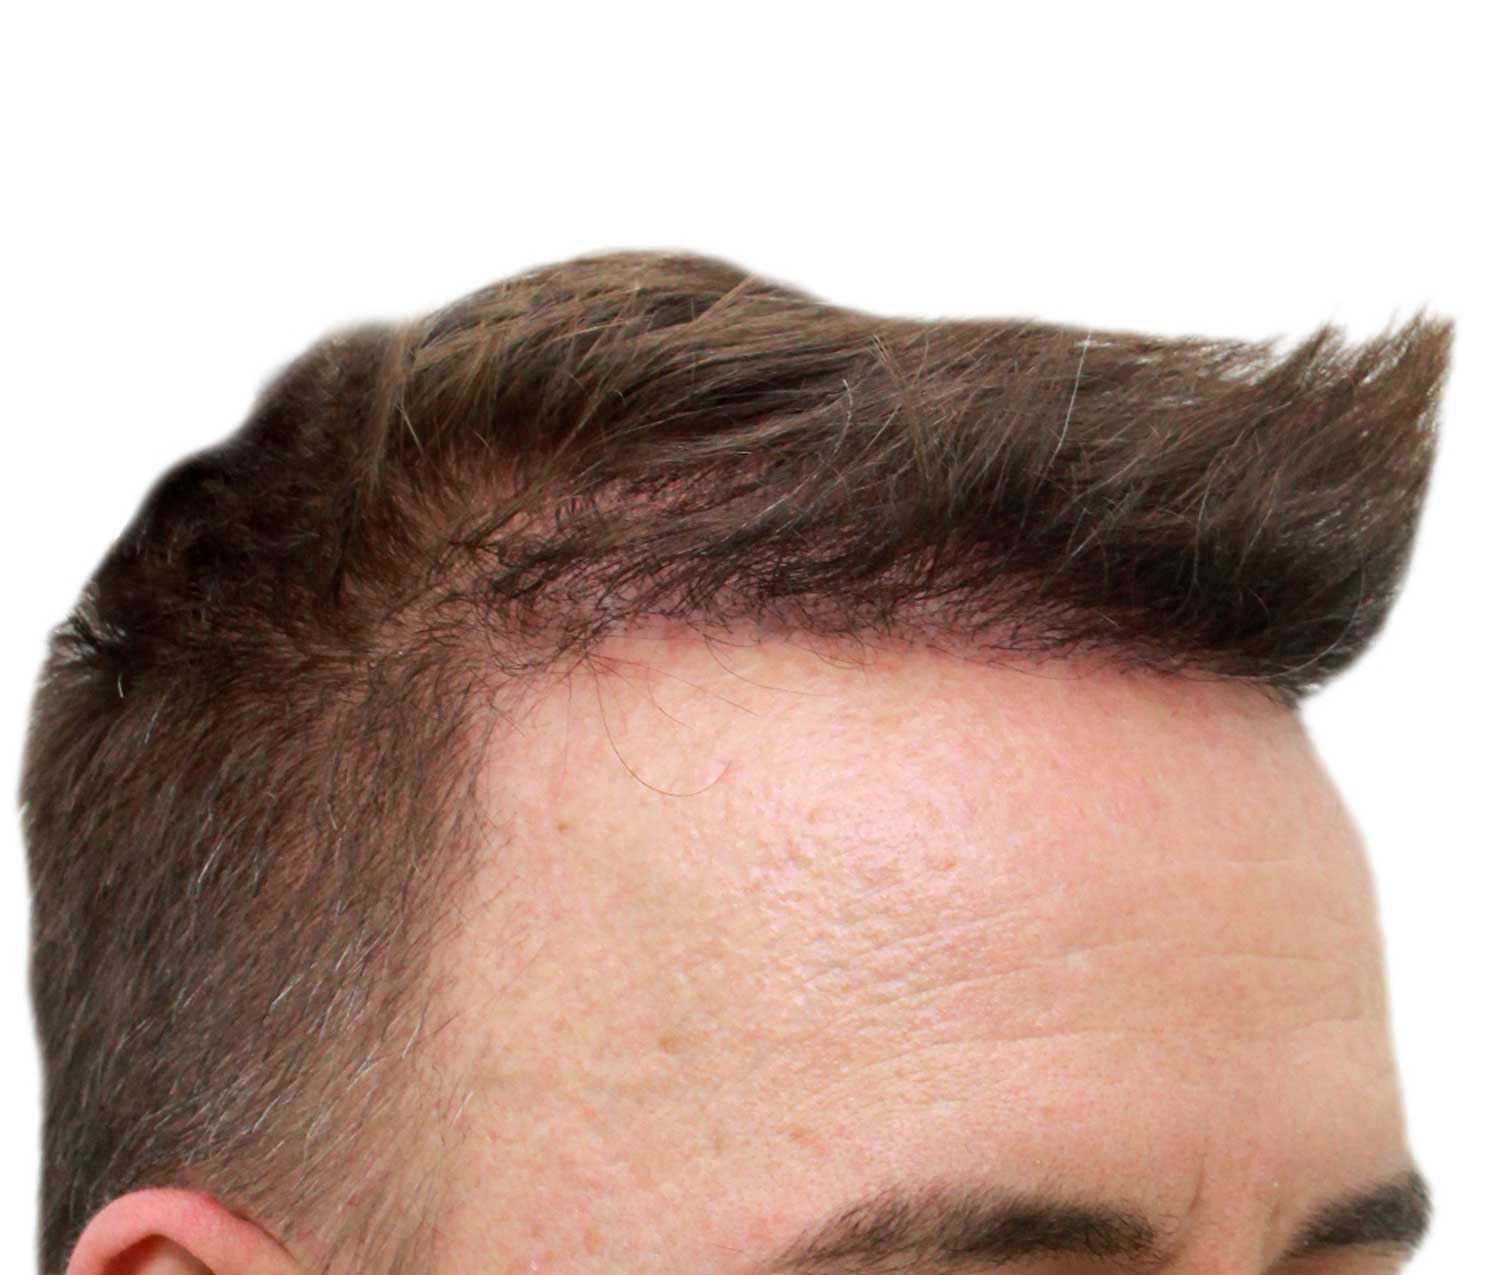 After hair restoration | Real patient, results may vary per individual